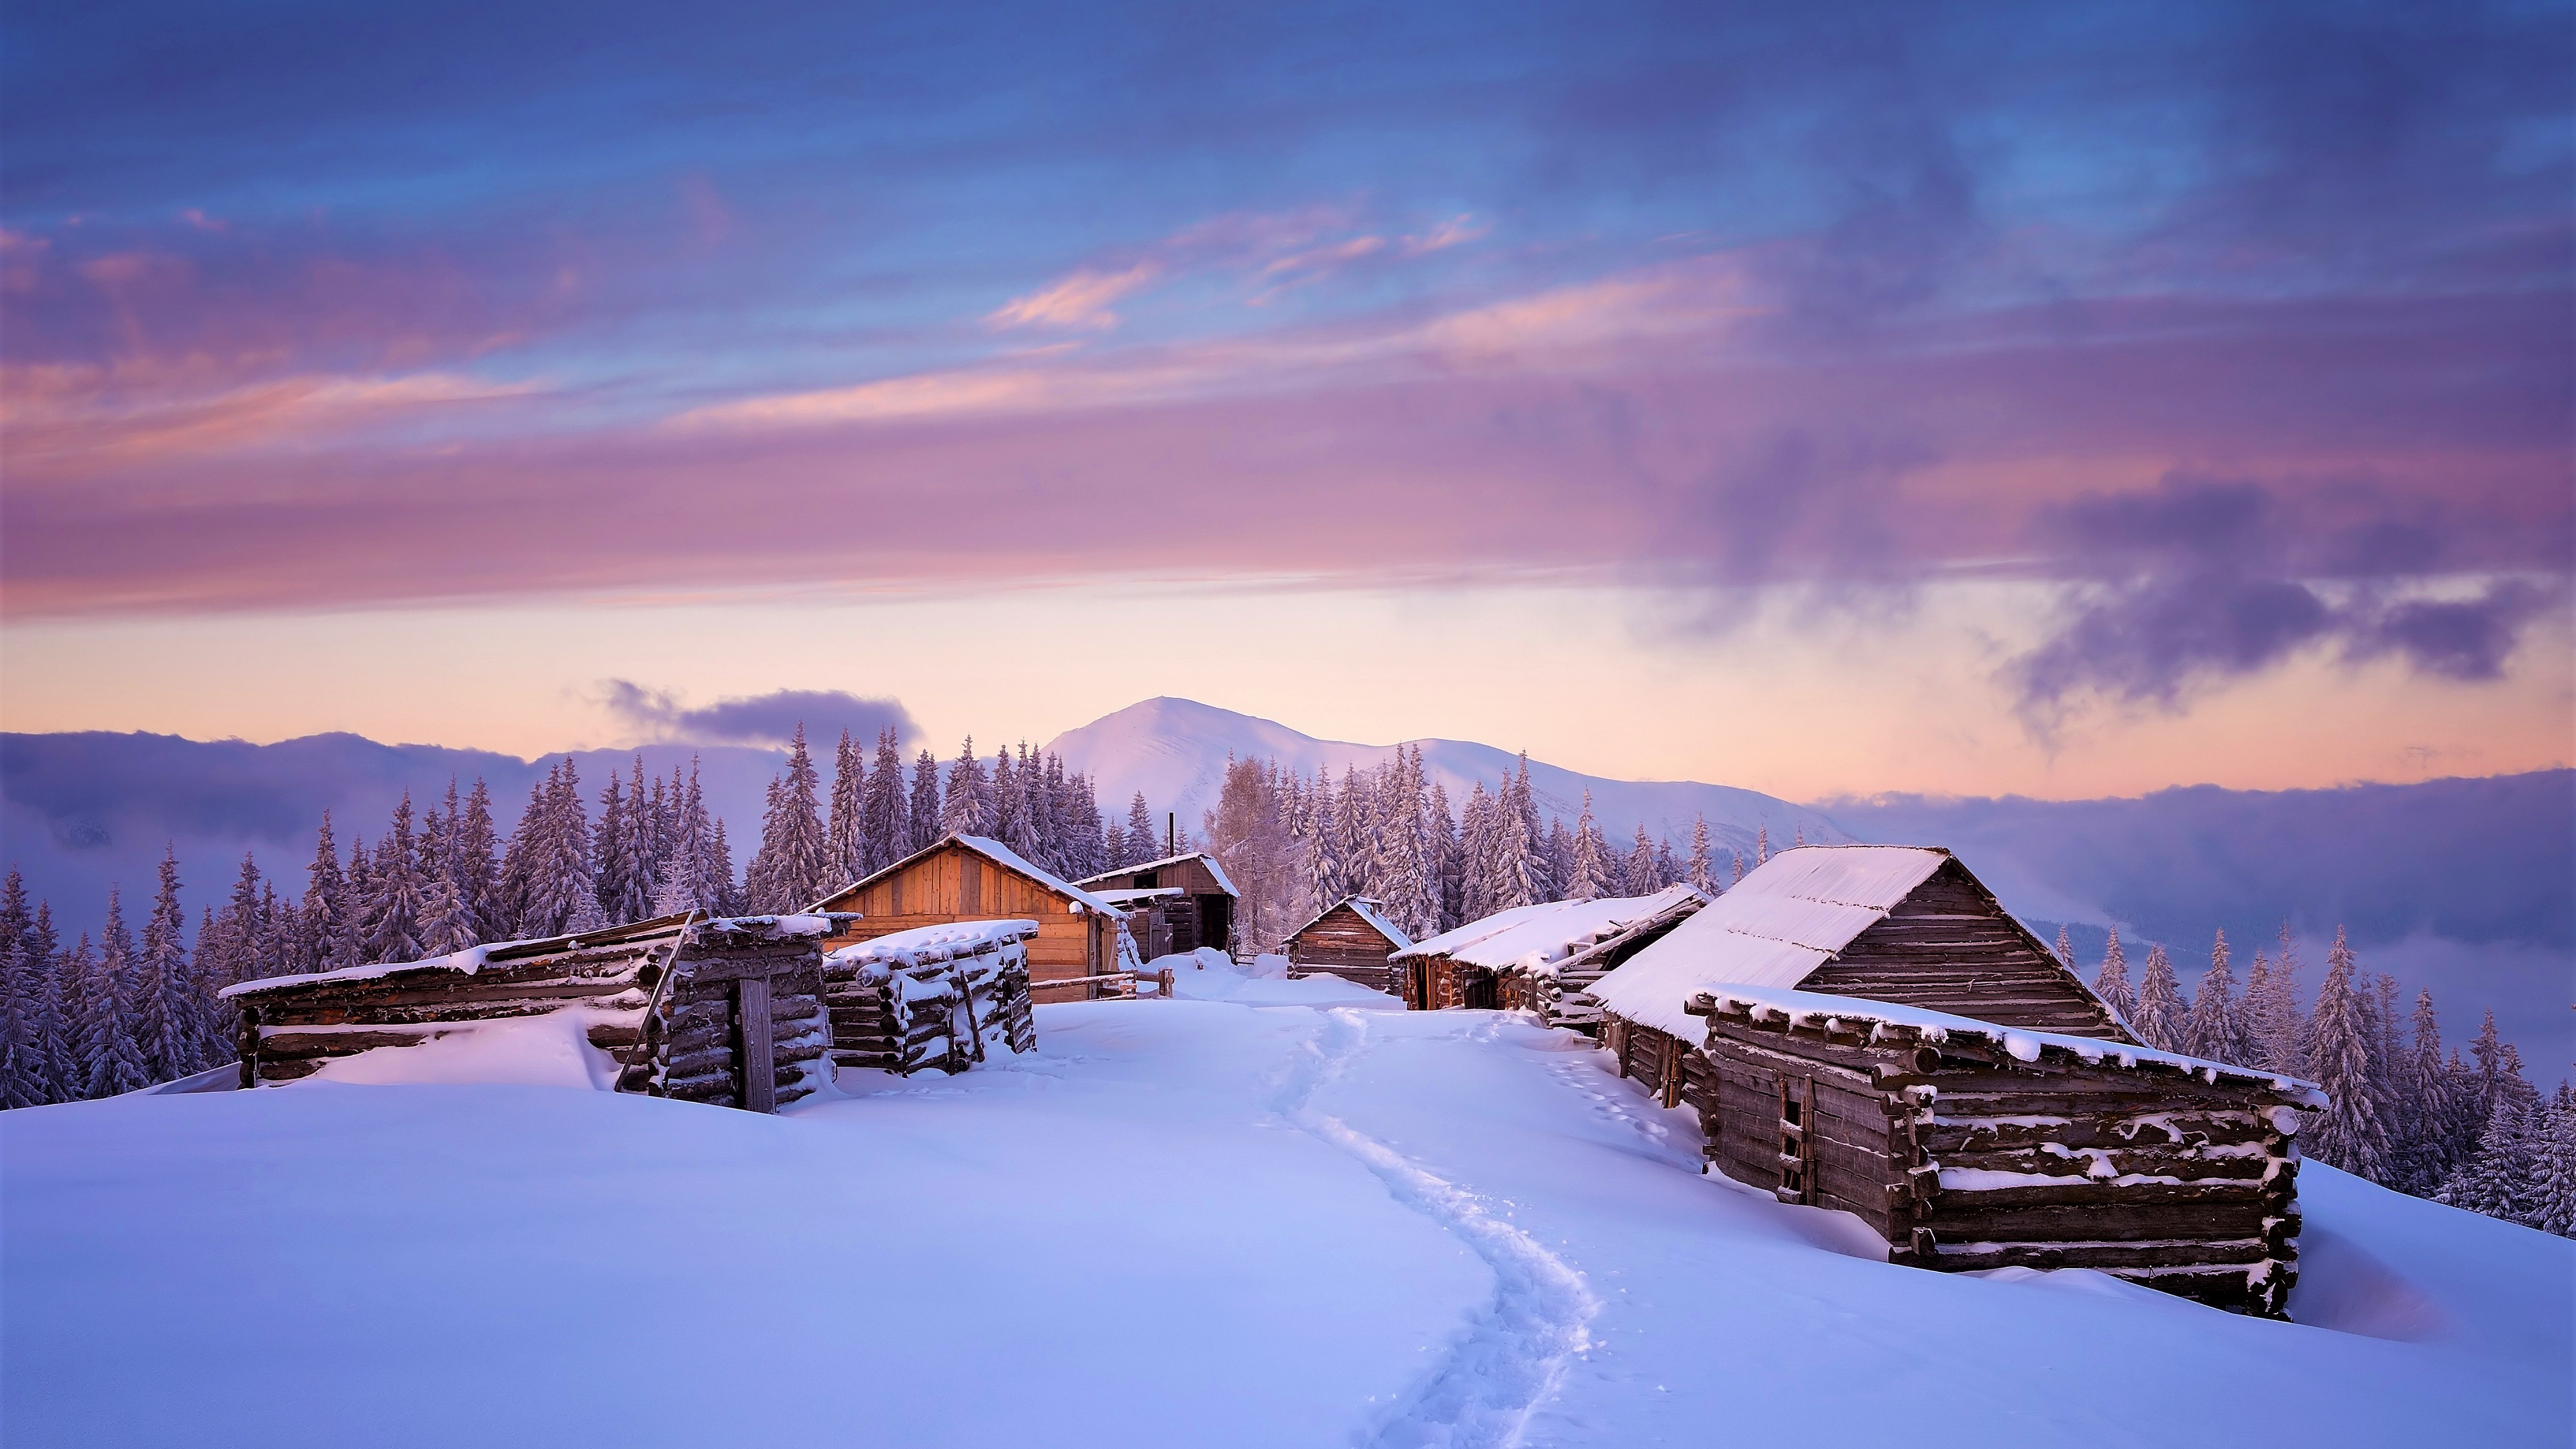 Winter Landscapes Wallpapers